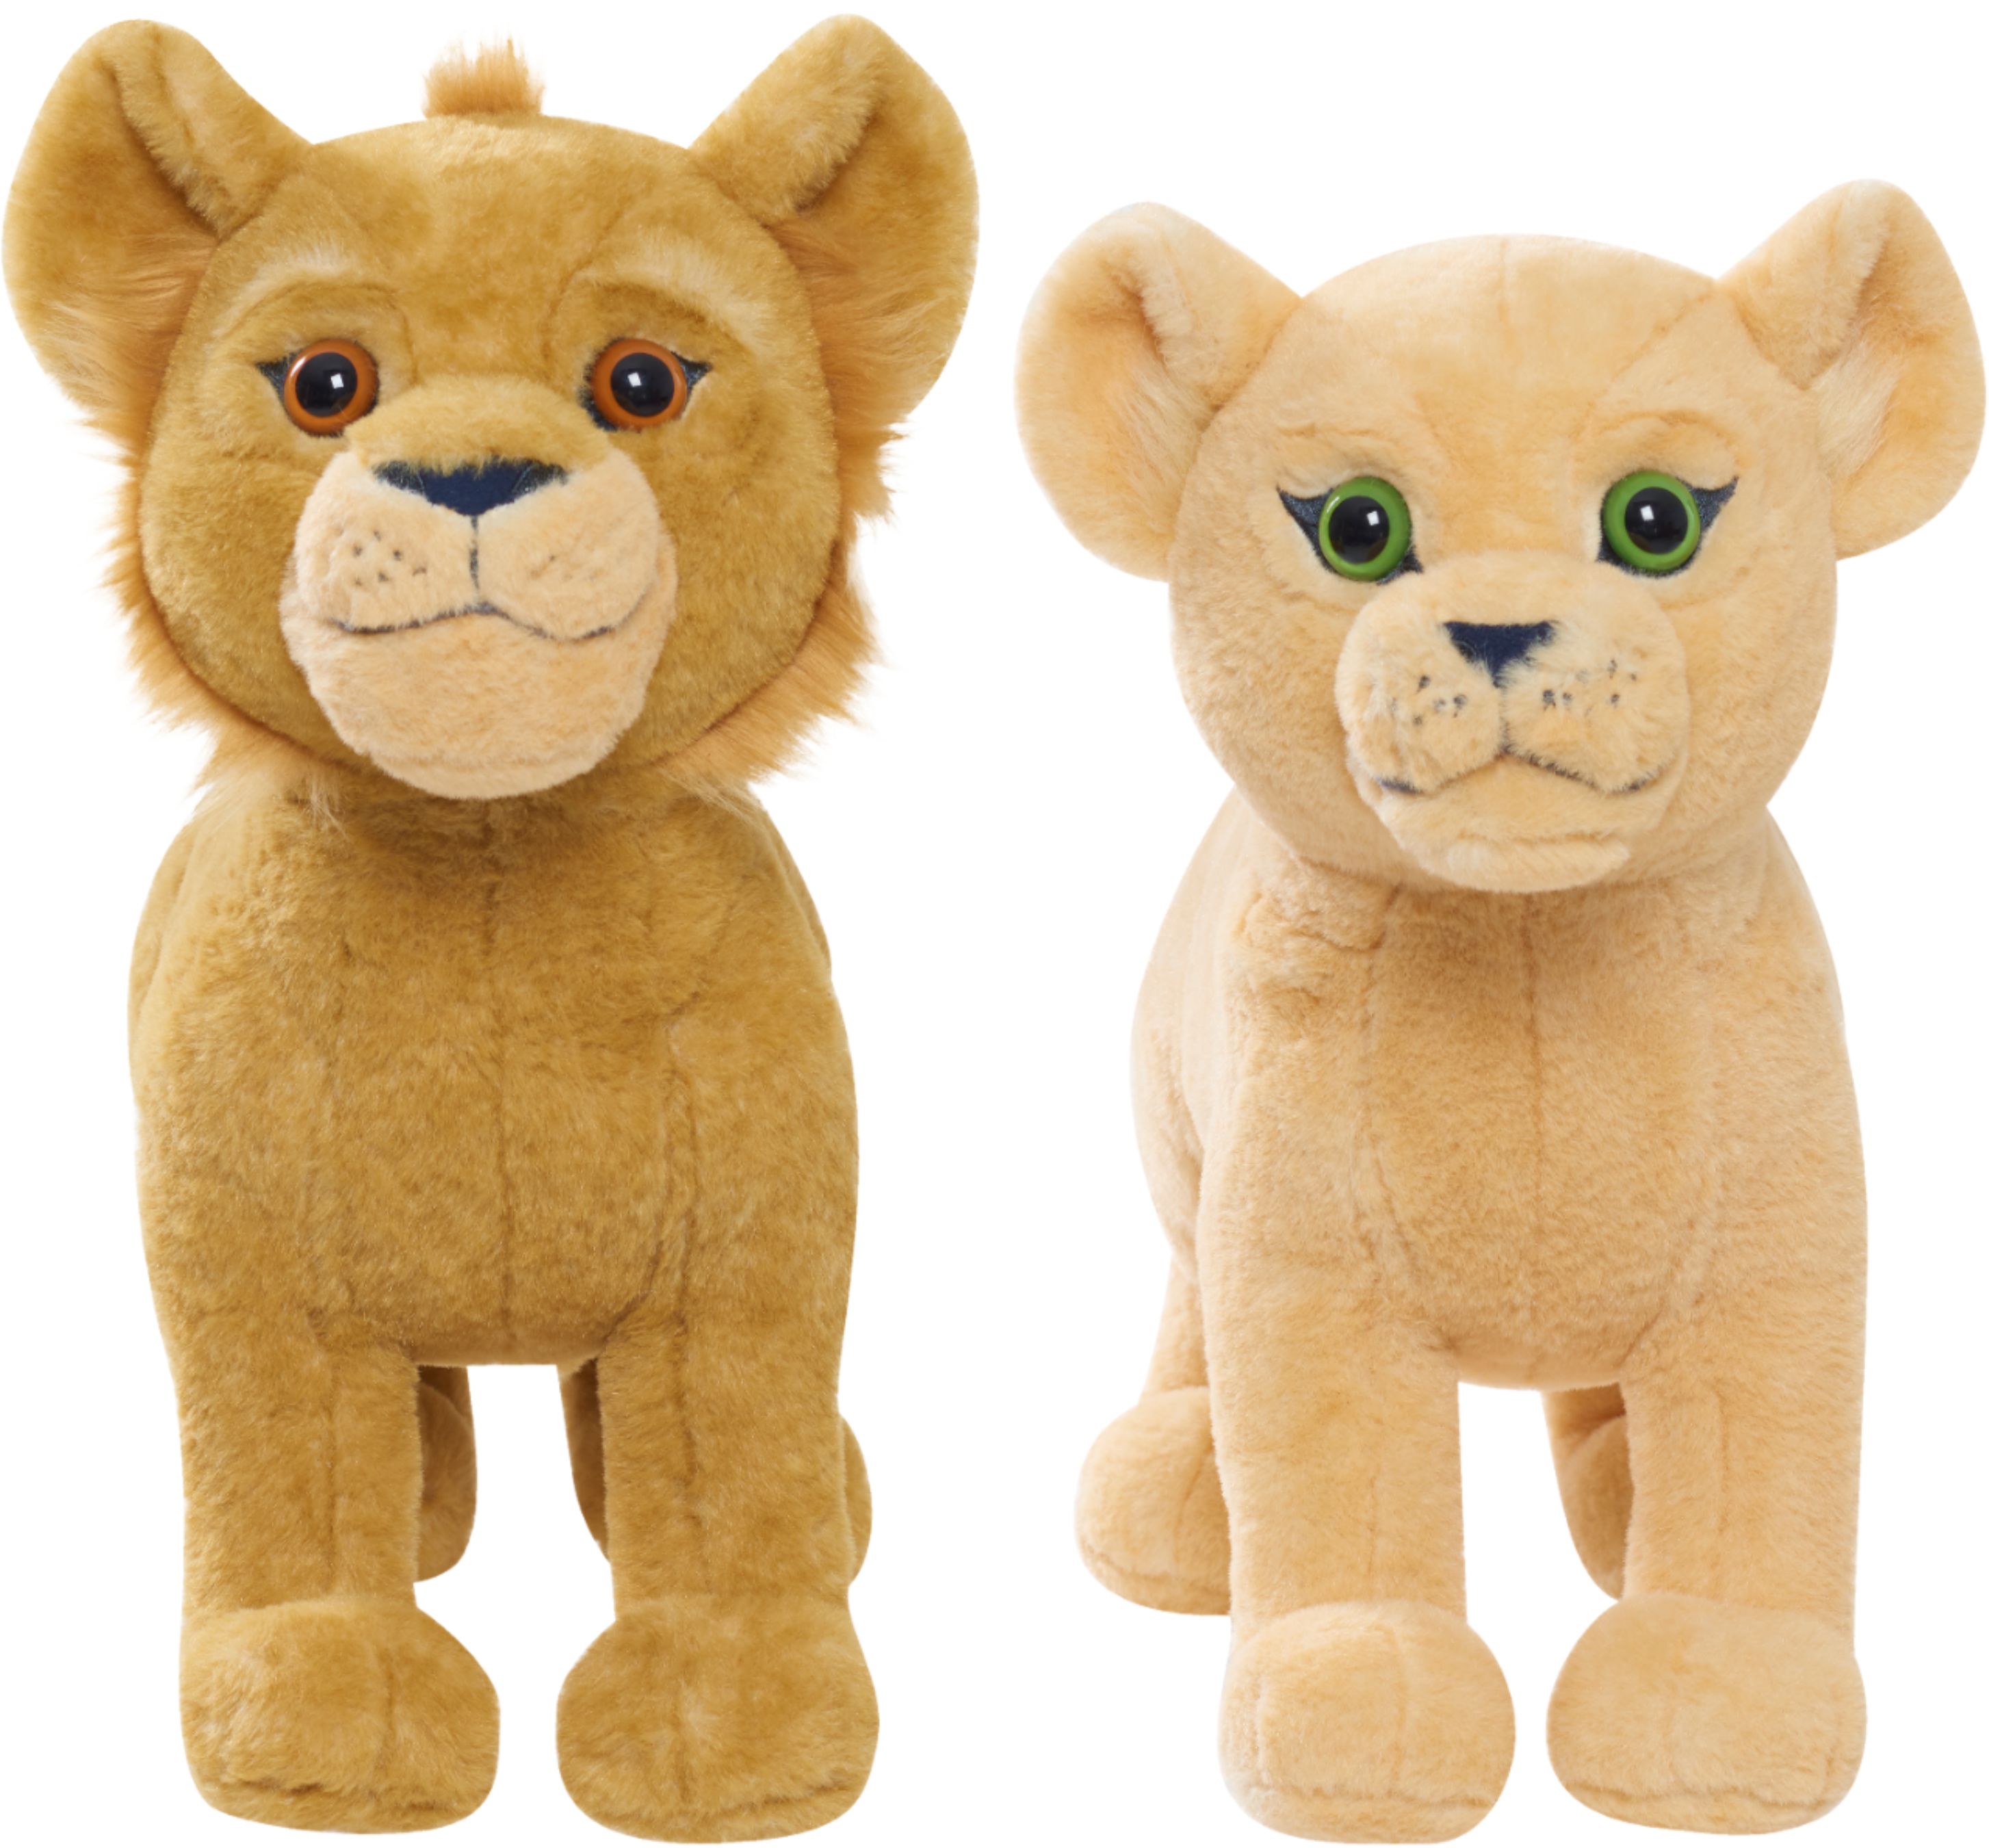 Lion King - 14" Fabric Plush Toy - Styles May Vary